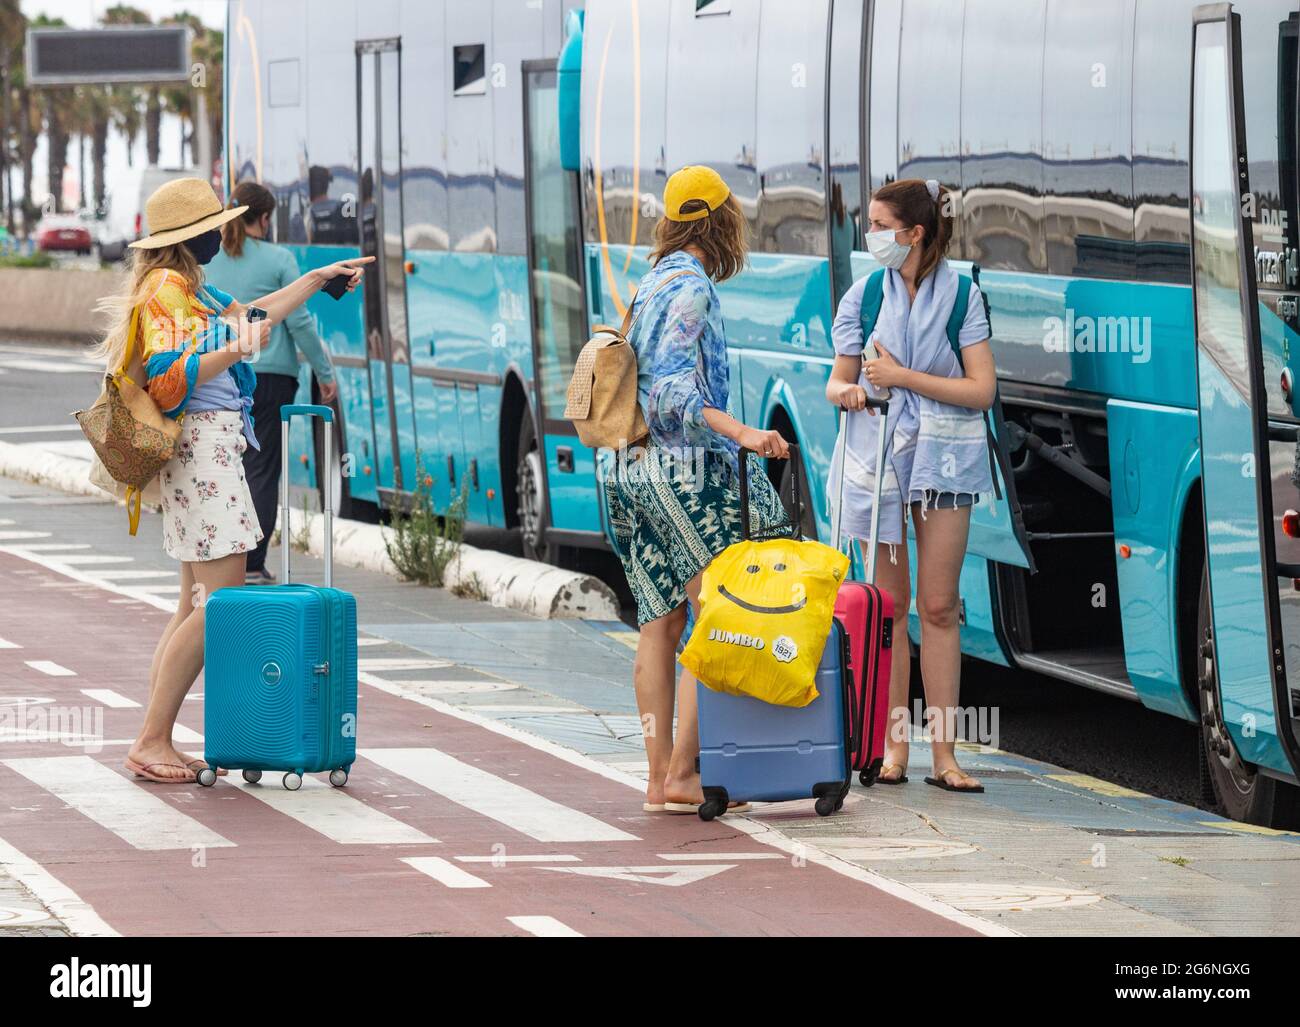 Las Palmas, Gran Canaria, Canary Islands, Spain. 7th July, 2021. Tourists  waiting for airport bus near the city beach in Las Palmas on Gran Canaria.  The Canary Islands, currently on the Amber